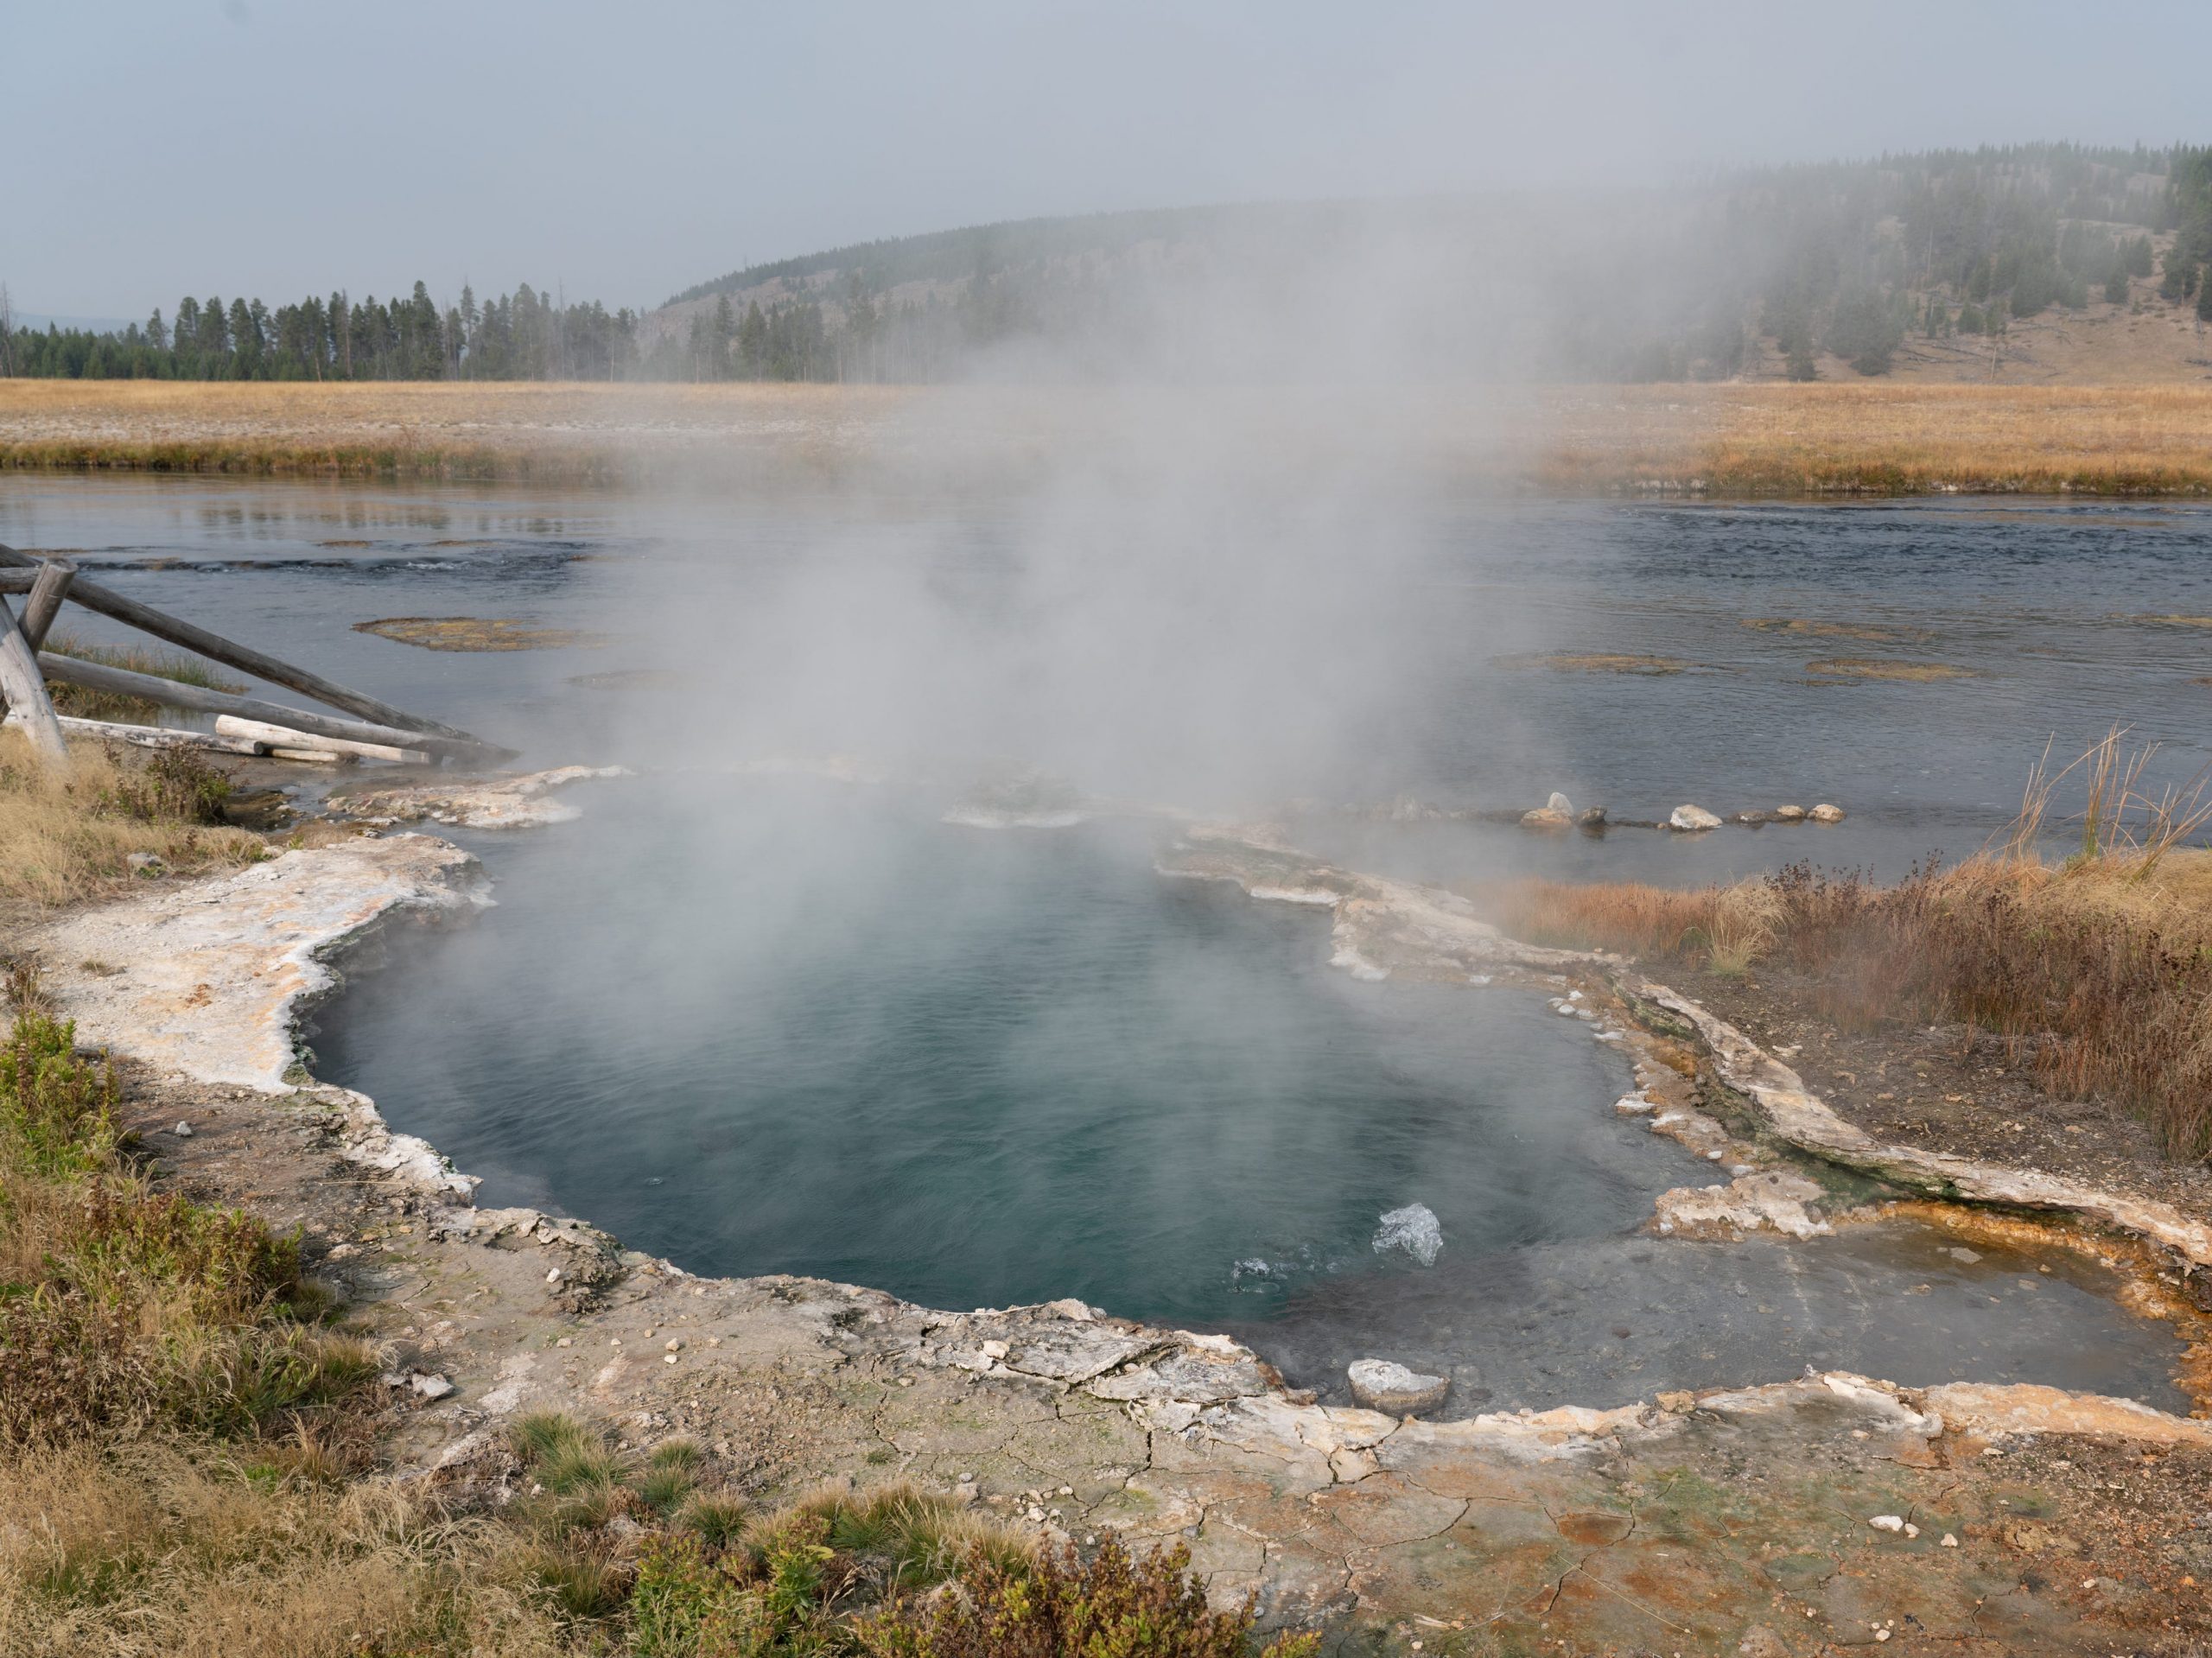 The Maiden's Grave Spring by the Firehole River on the Fountain Flats Drive in Yellowstone National Park in Wyoming, USA.